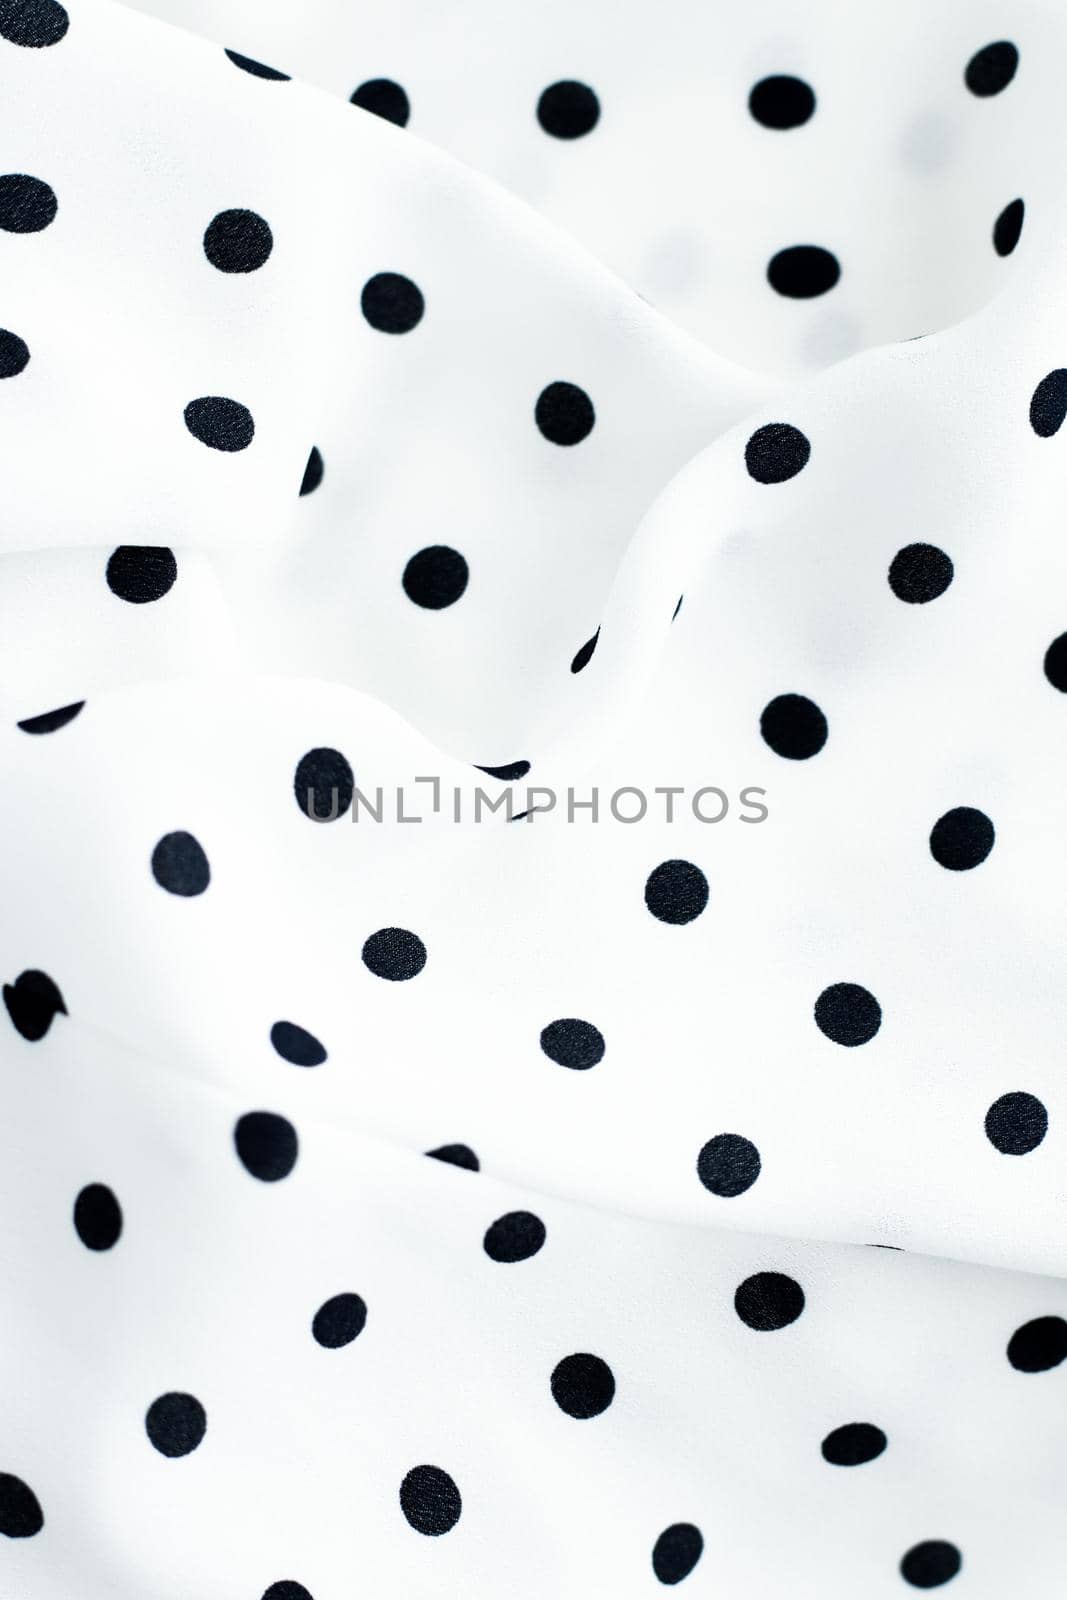 Classic polka dot textile background texture, black dots on white luxury fabric design pattern by Anneleven